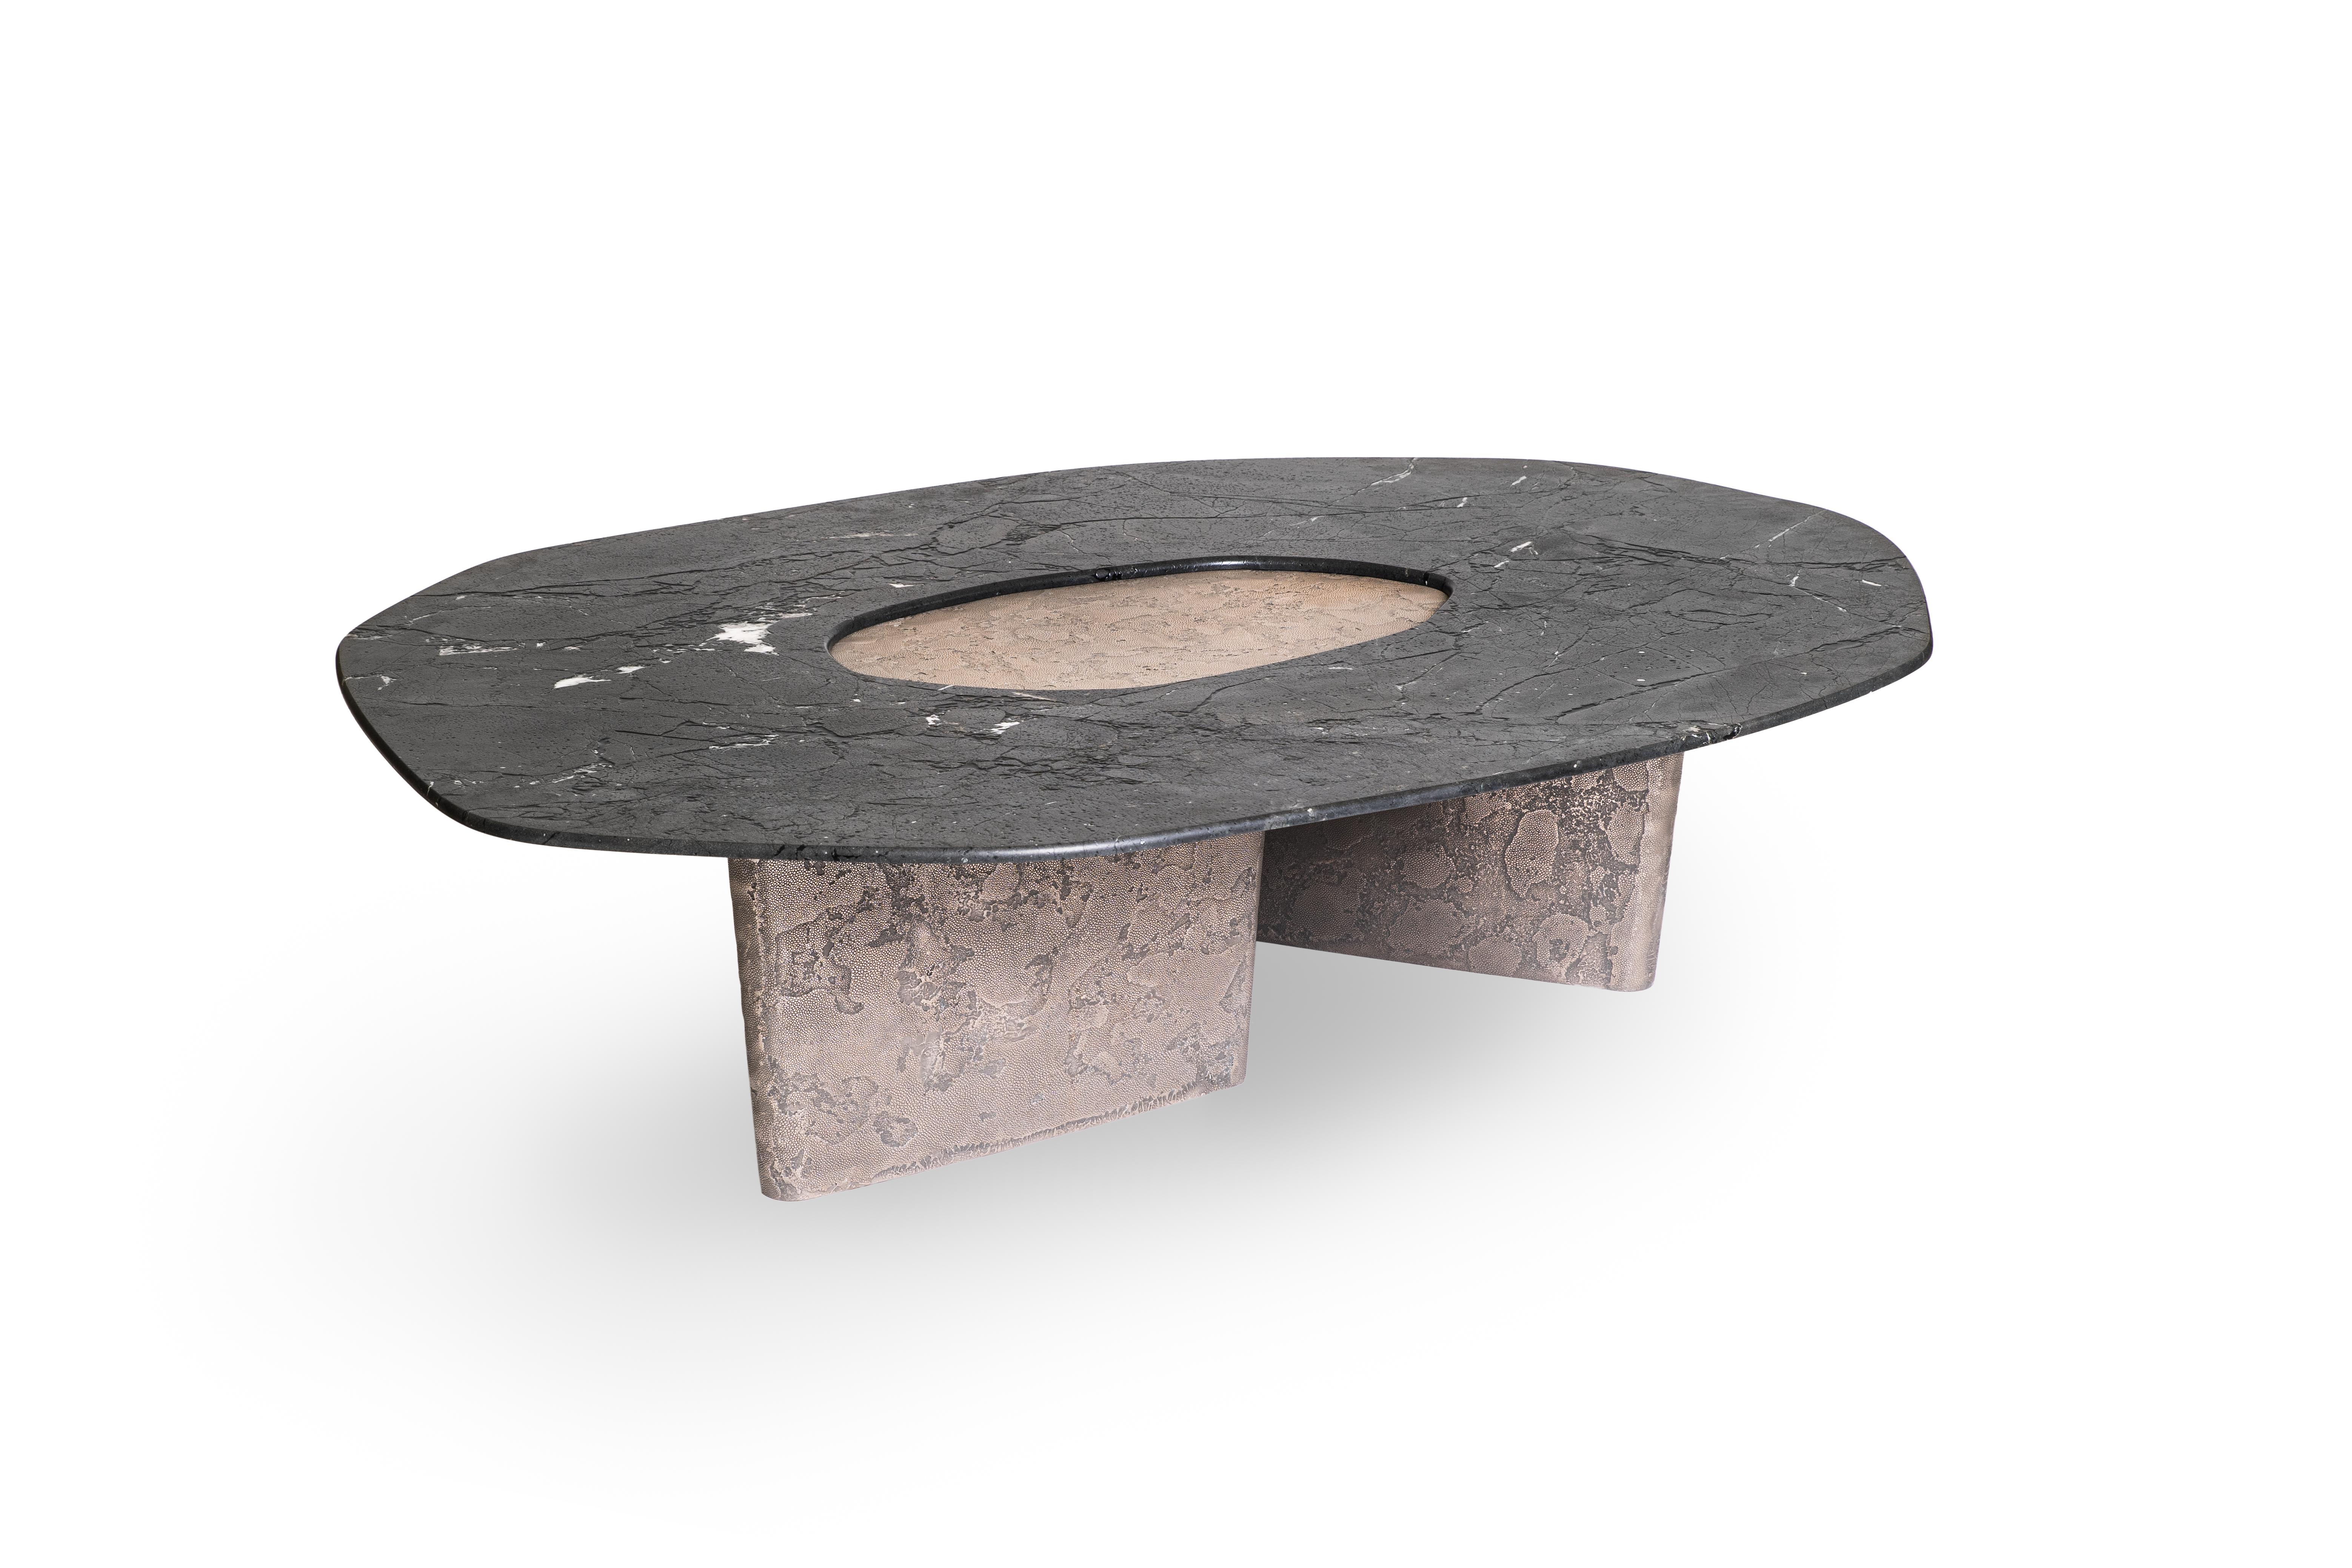 “The Elements Vb” Contemporary Center Table, one of a kind and one of the series of various coffee tables within Elements collection. 
Created of the two totally different structures, reveals some symbiotic influence between each other. One